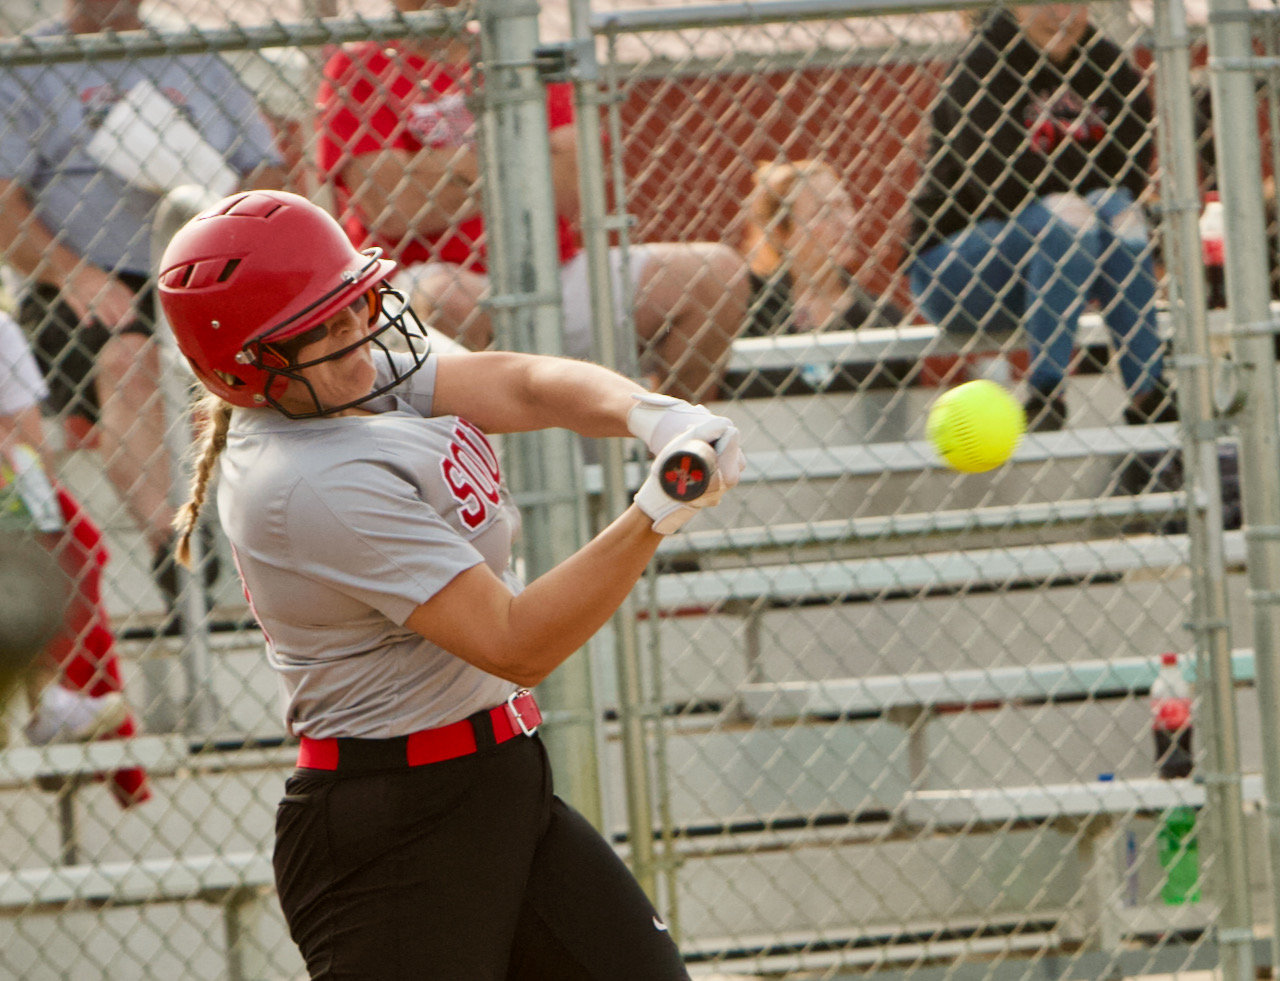 Macie Shirk added three hits as she continues to swing a hot bat for the Mounties.